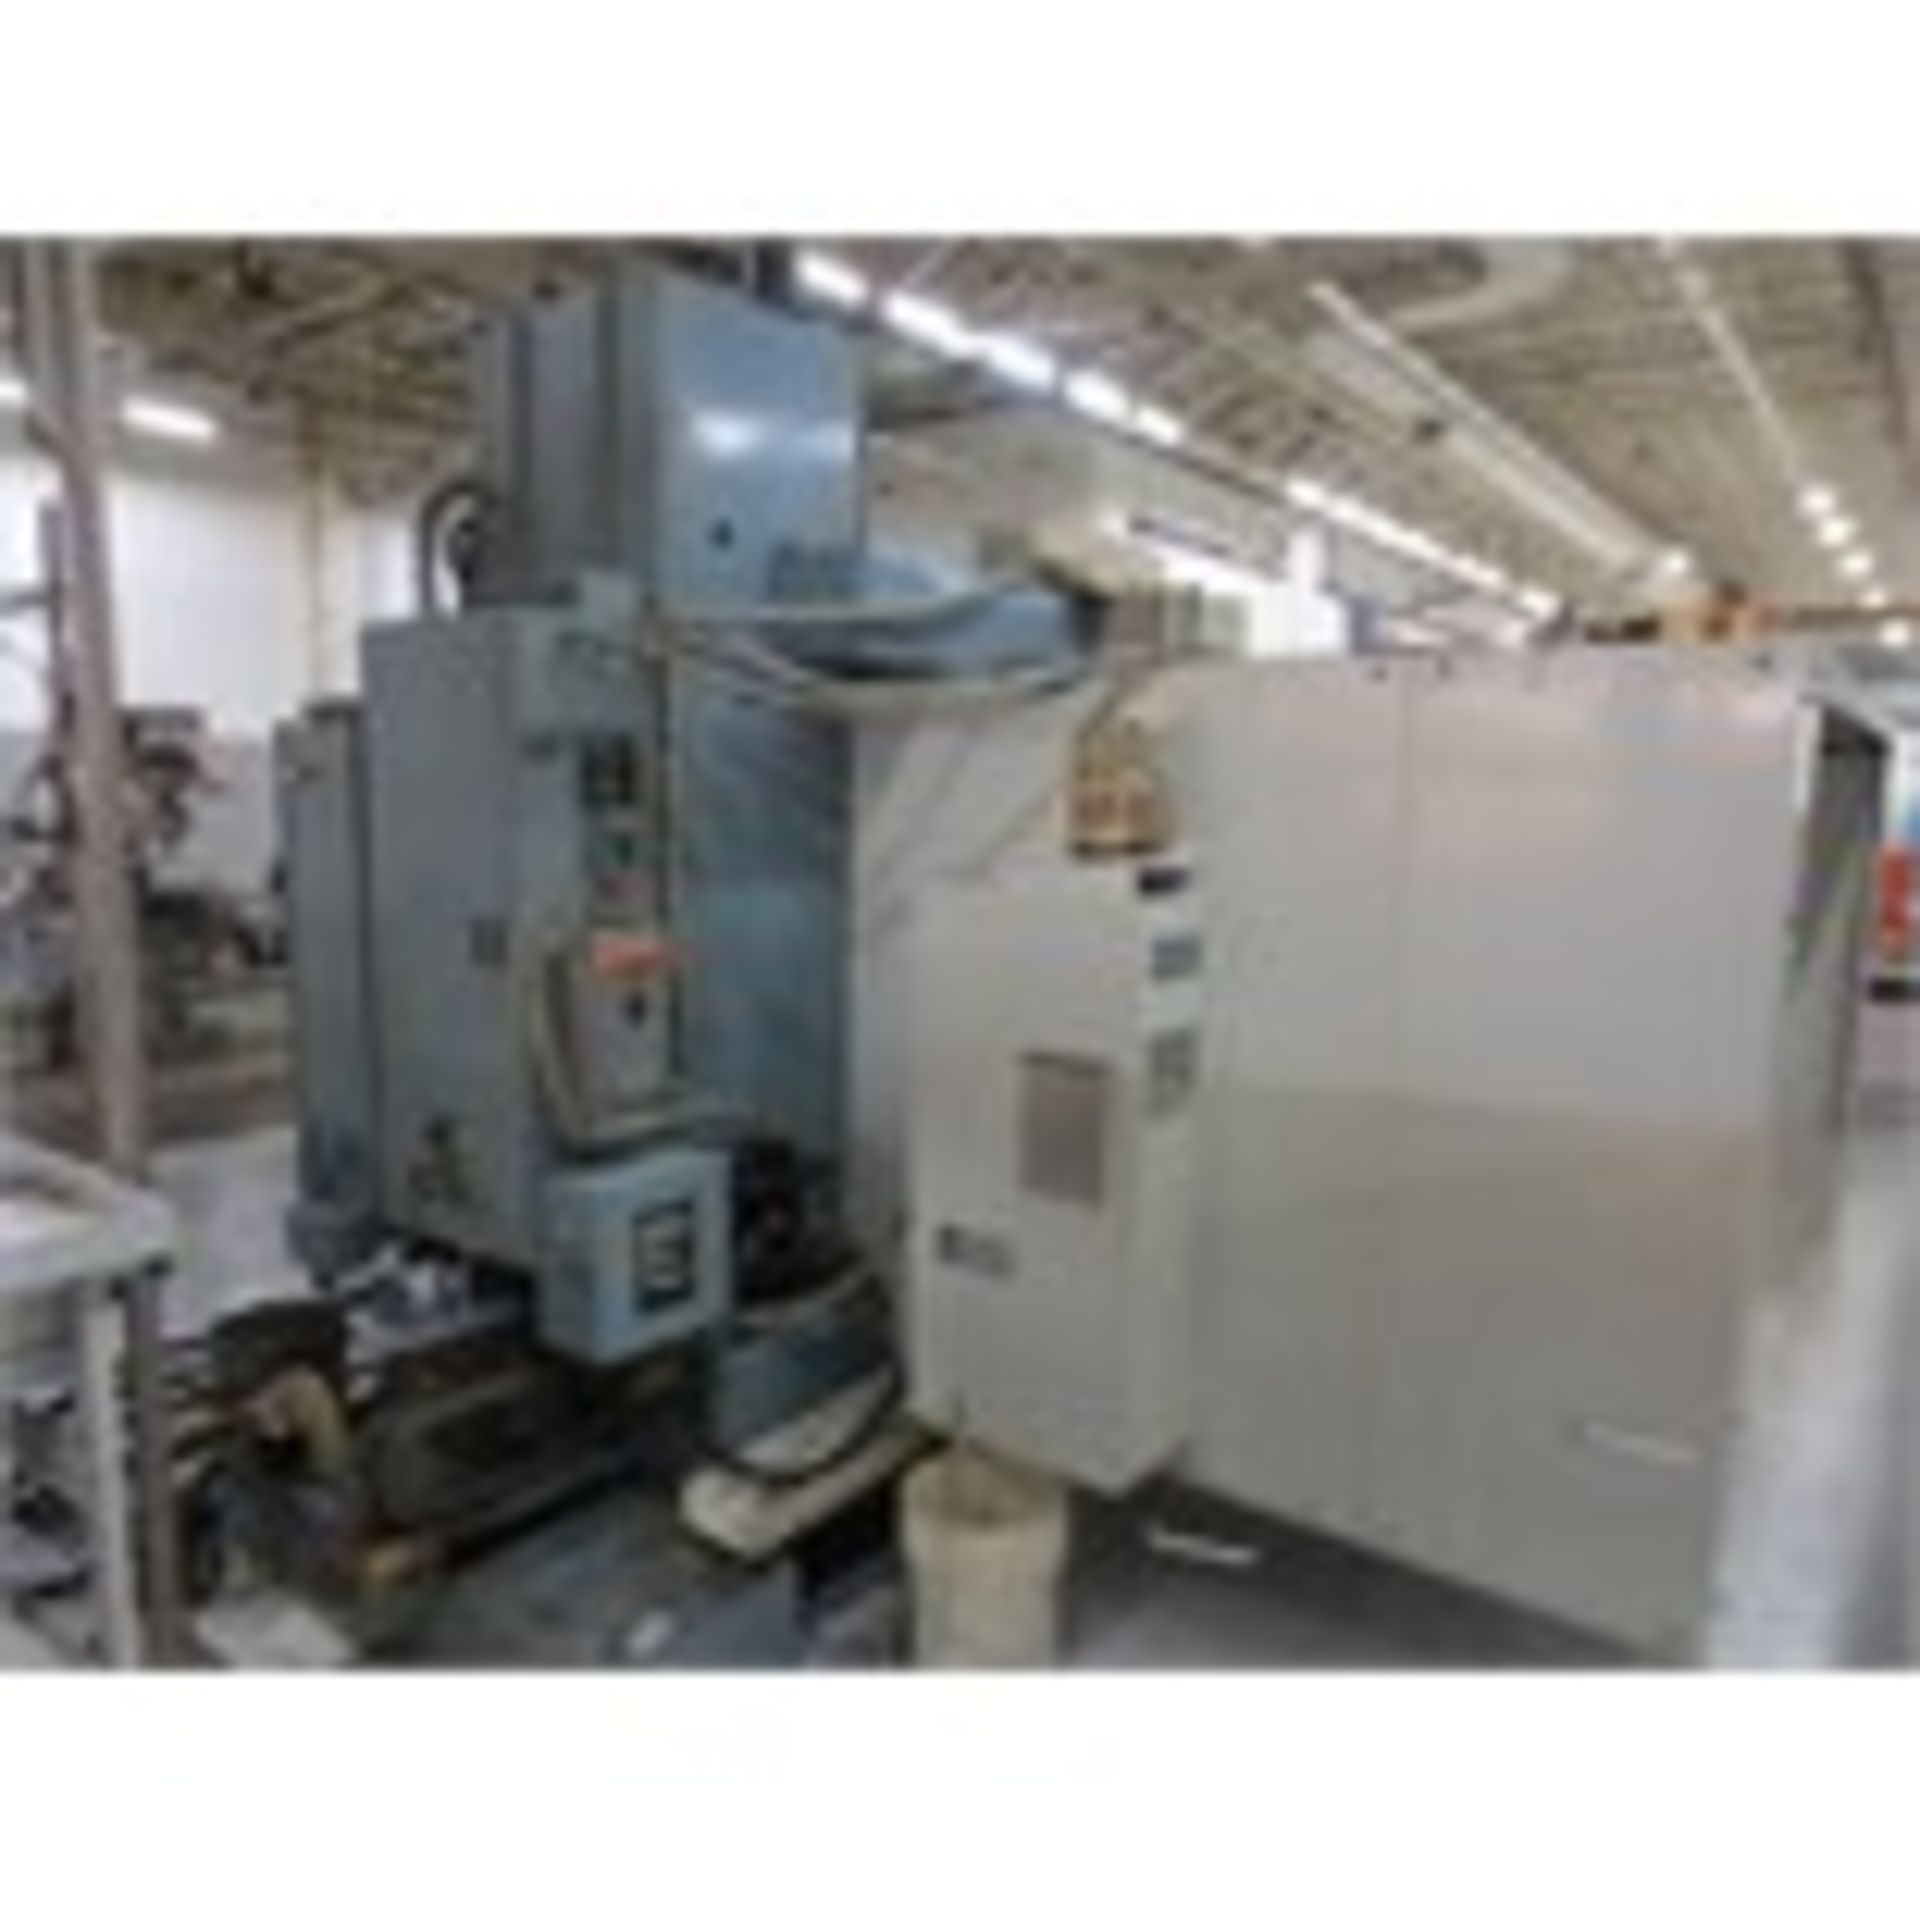 Fadal Vertical Milling Machine, Fadal CNC88 controls, 21 port tool holder, 94in x 30in work area, - Image 7 of 11